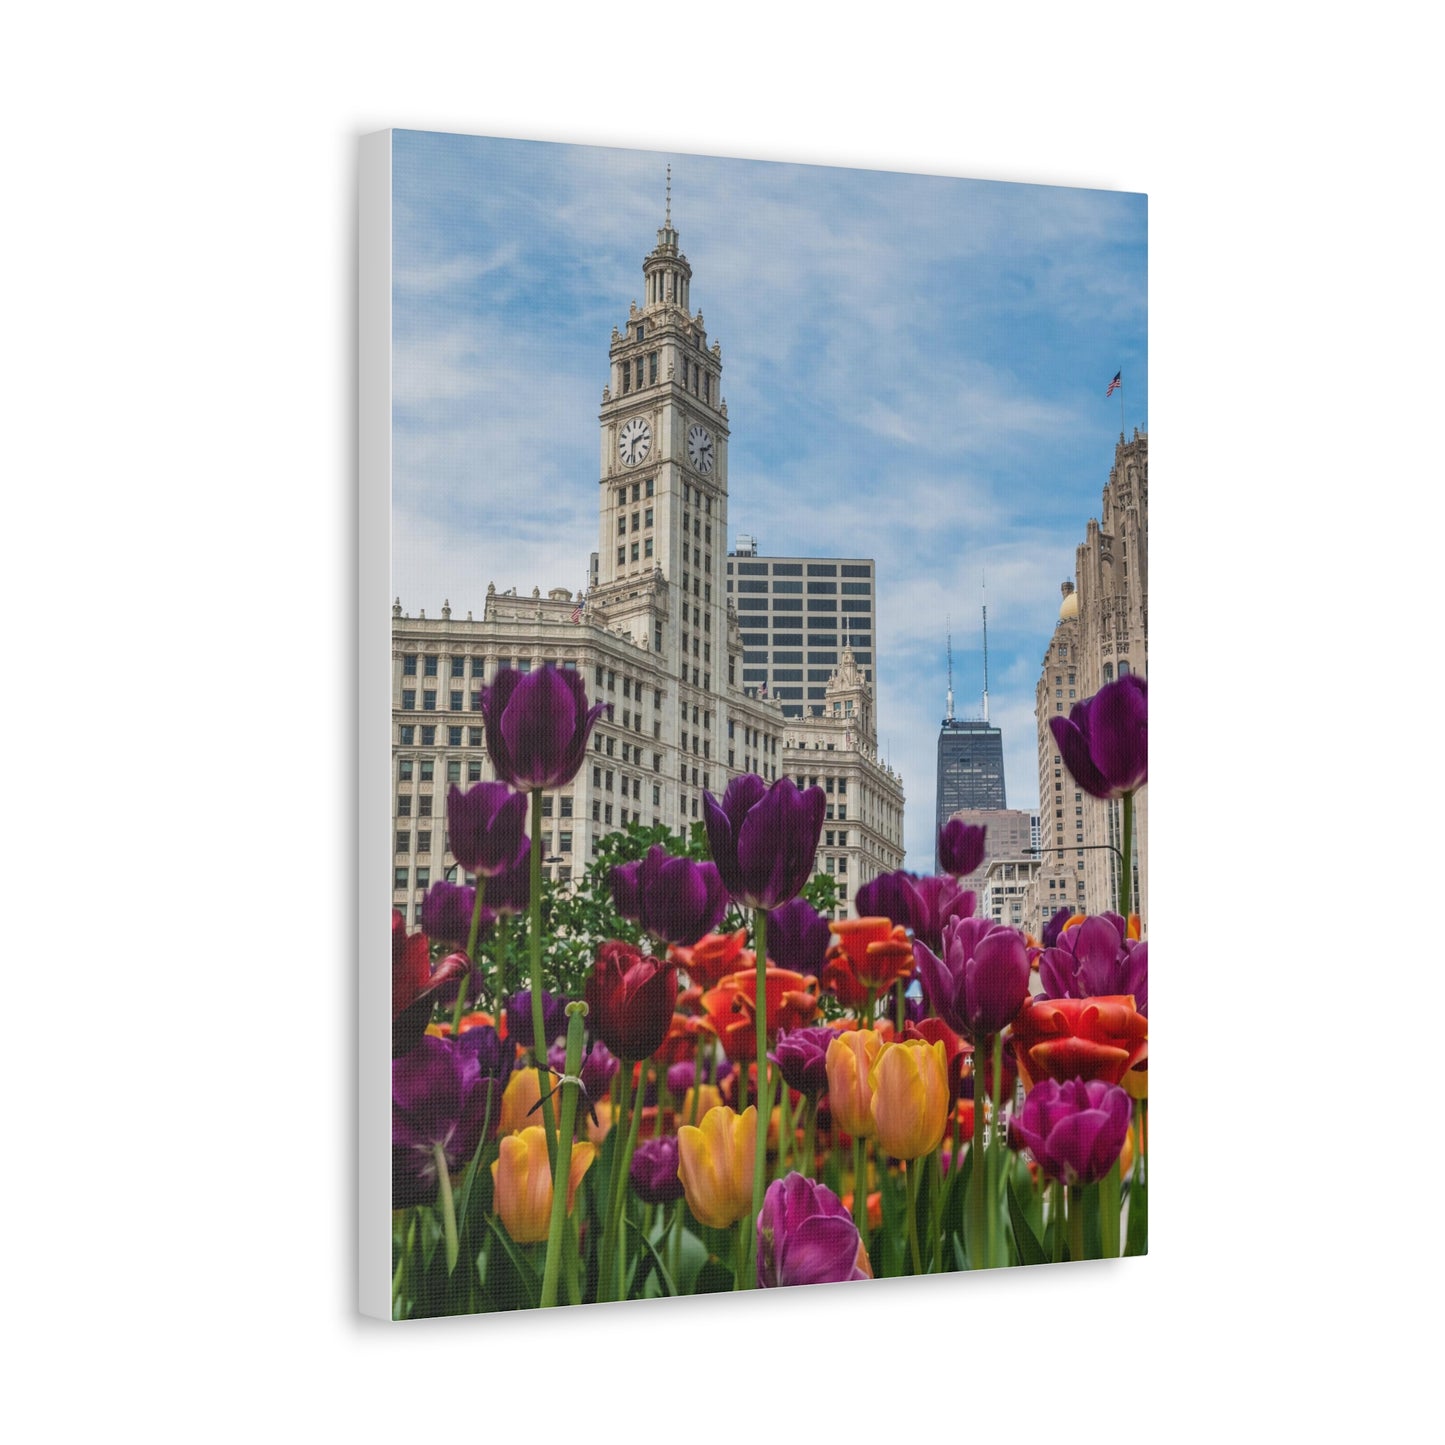 Wrigley Building with Spring Tulips, Chicago - Canvas Wall Print (Free Shipping)